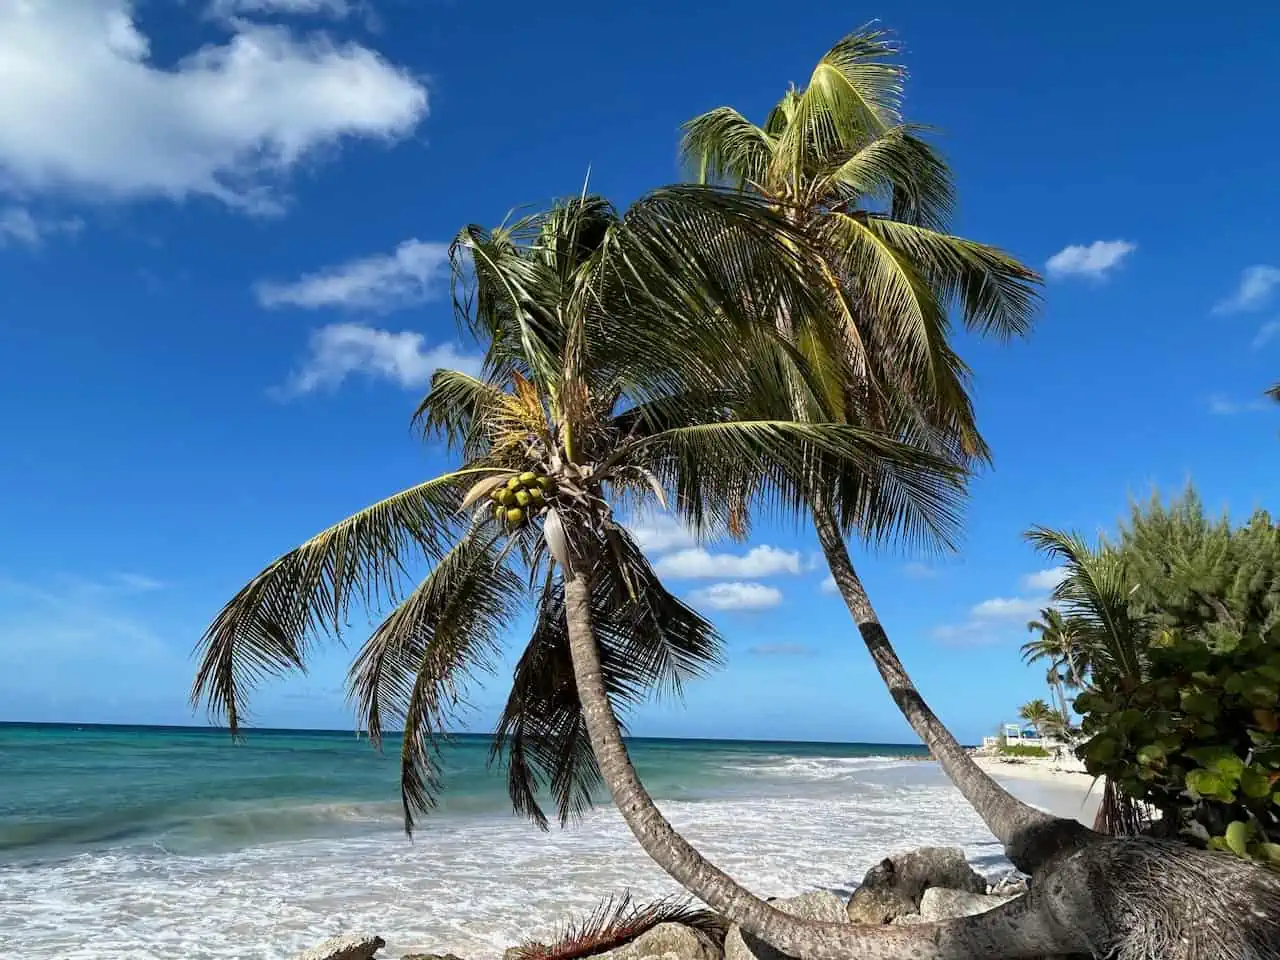 Why The Coconut Palm Points to the Sea - The Natural Navigator